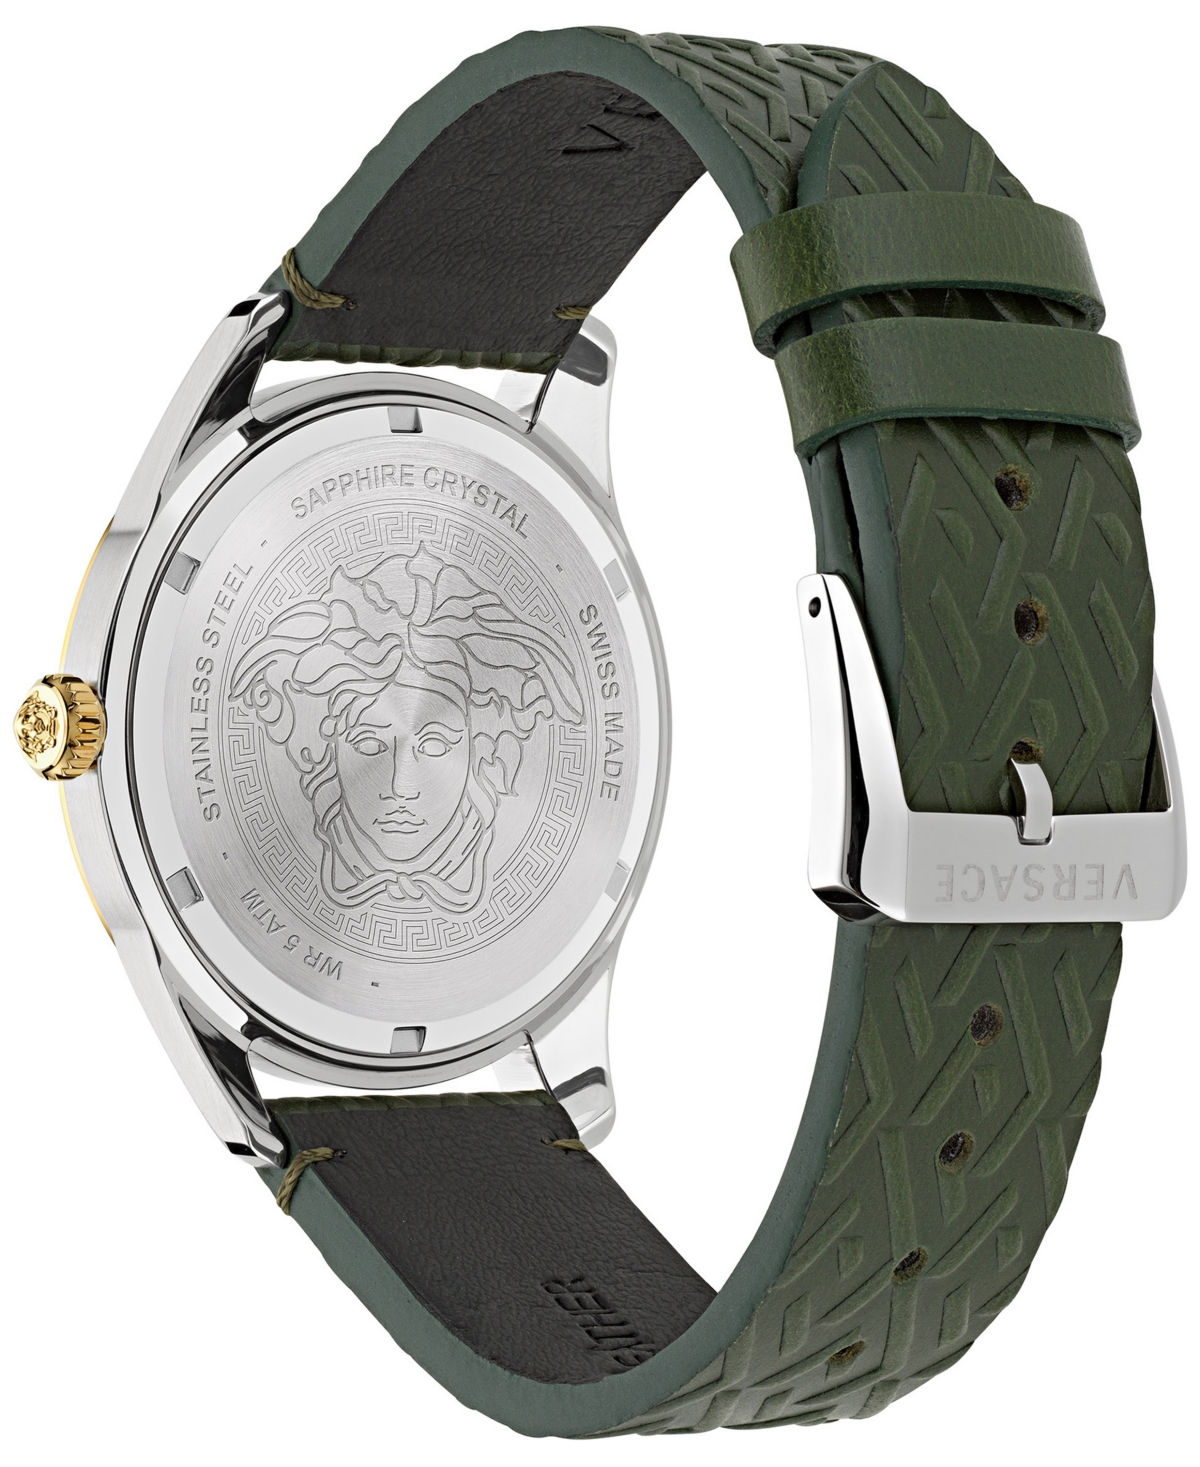 Shop Versace Men's Swiss Greca Time Gmt Green Leather Strap Watch 41mm In Two Tone